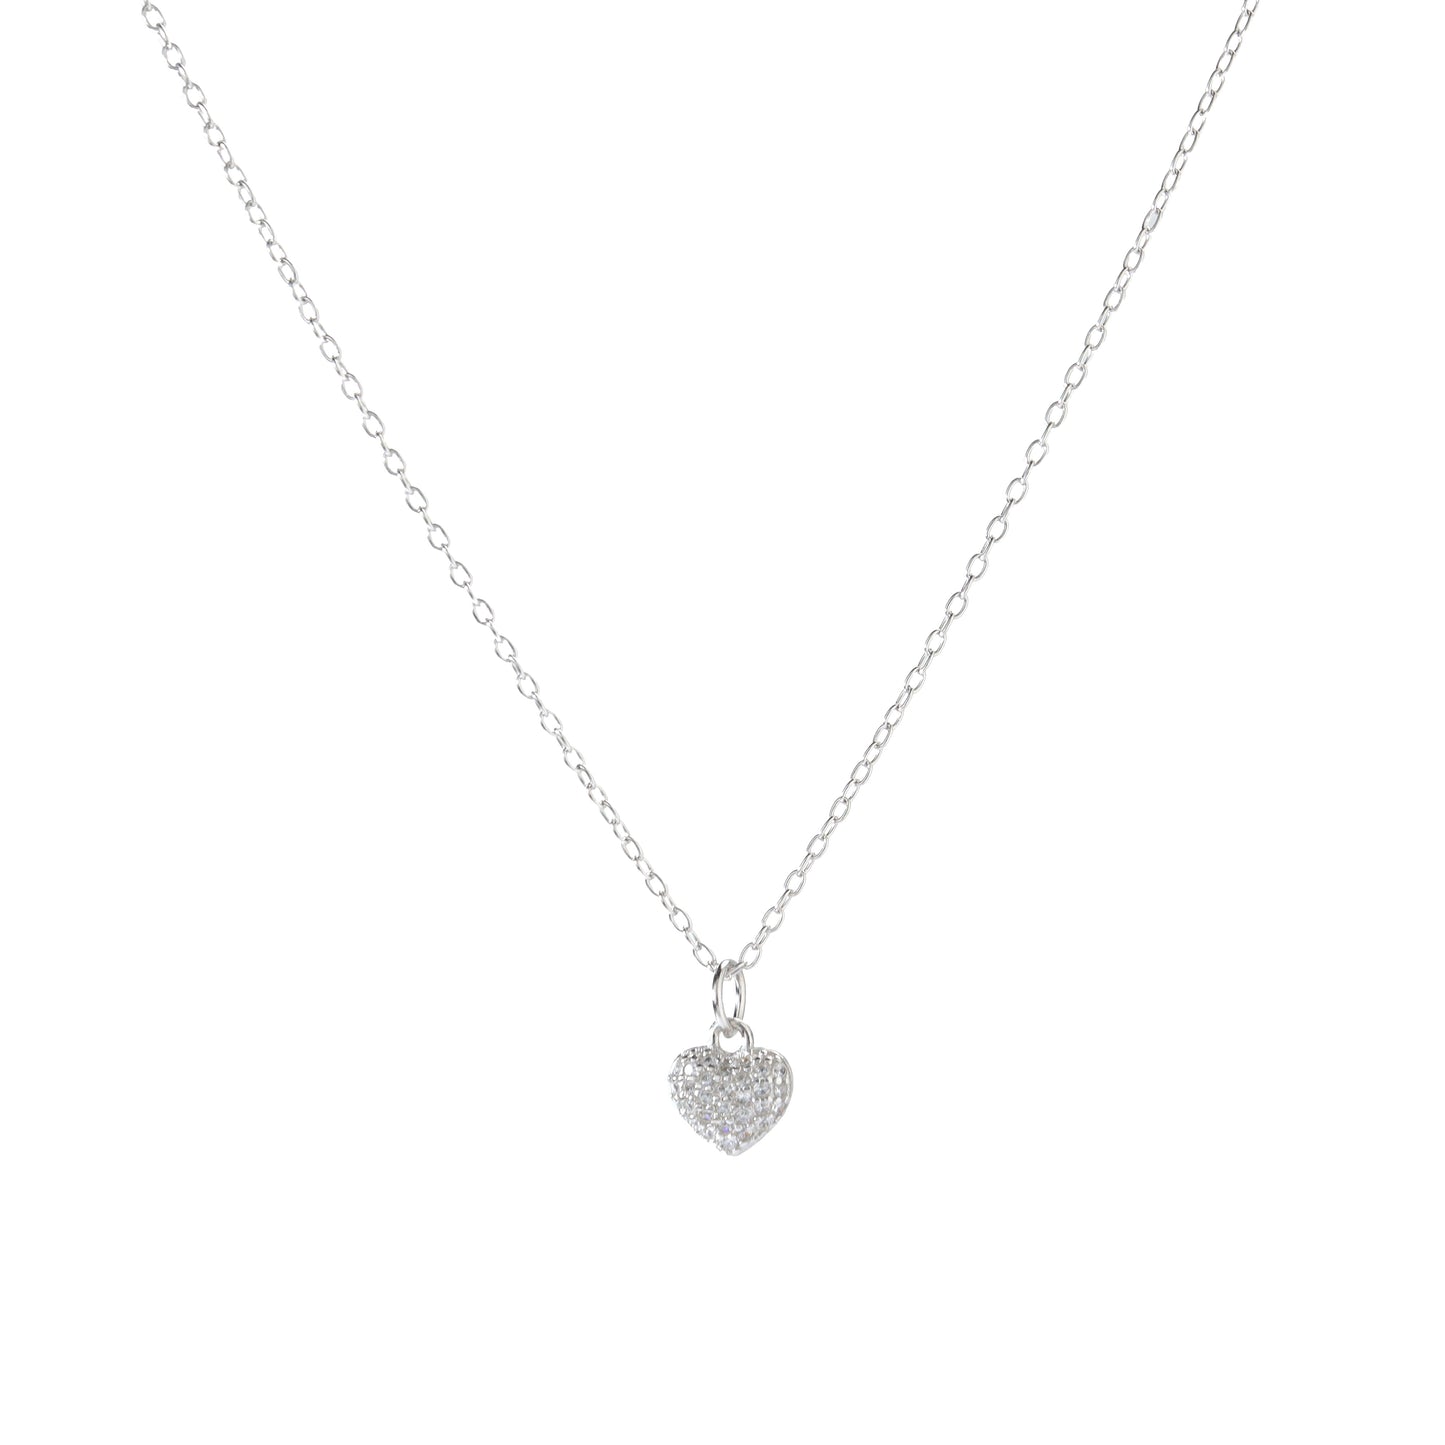 Cherry Love Silver 925 Necklace